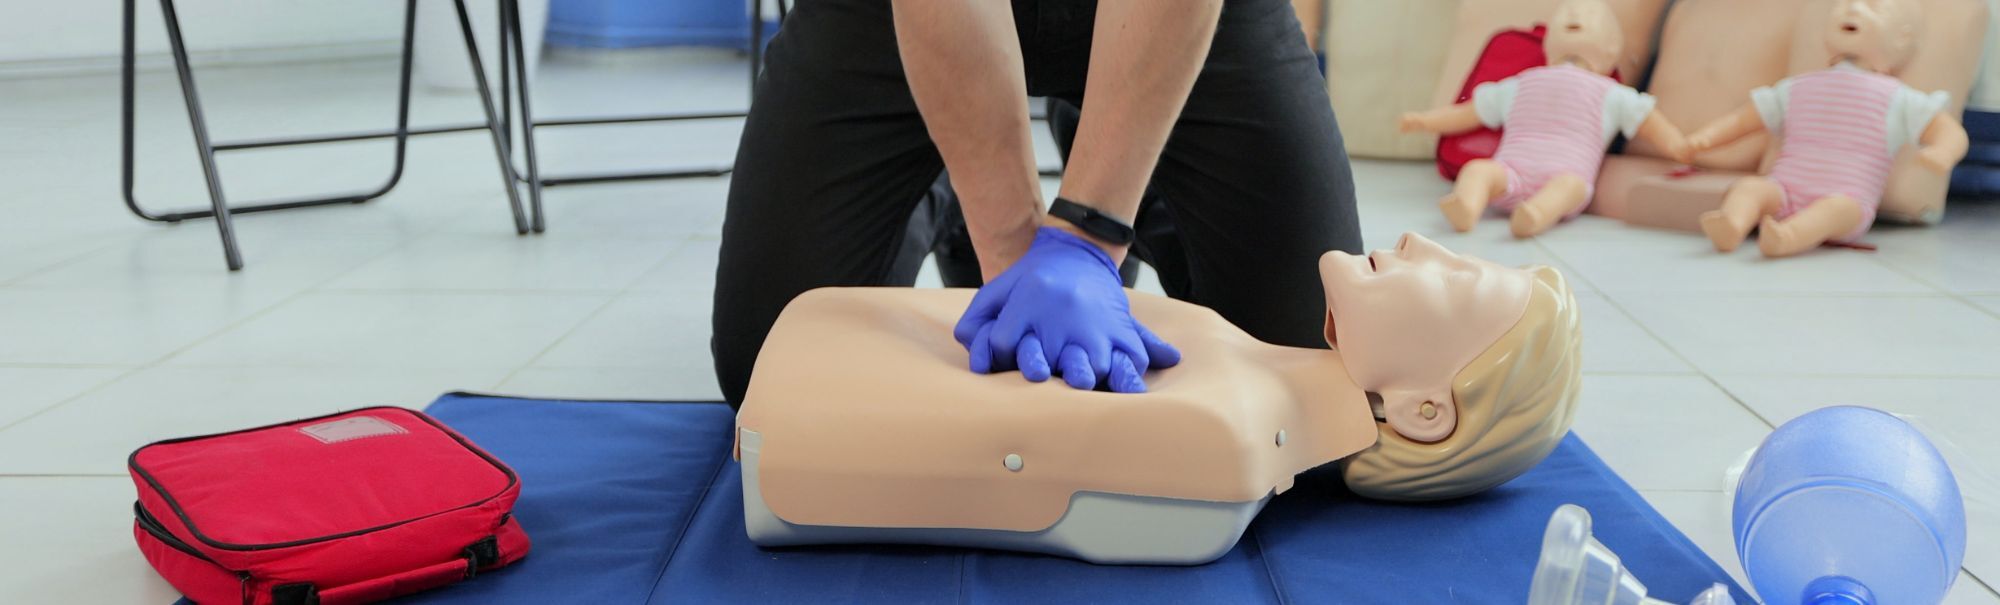 St. John Ambulance Standard First Aid BLS CPR Level C AED